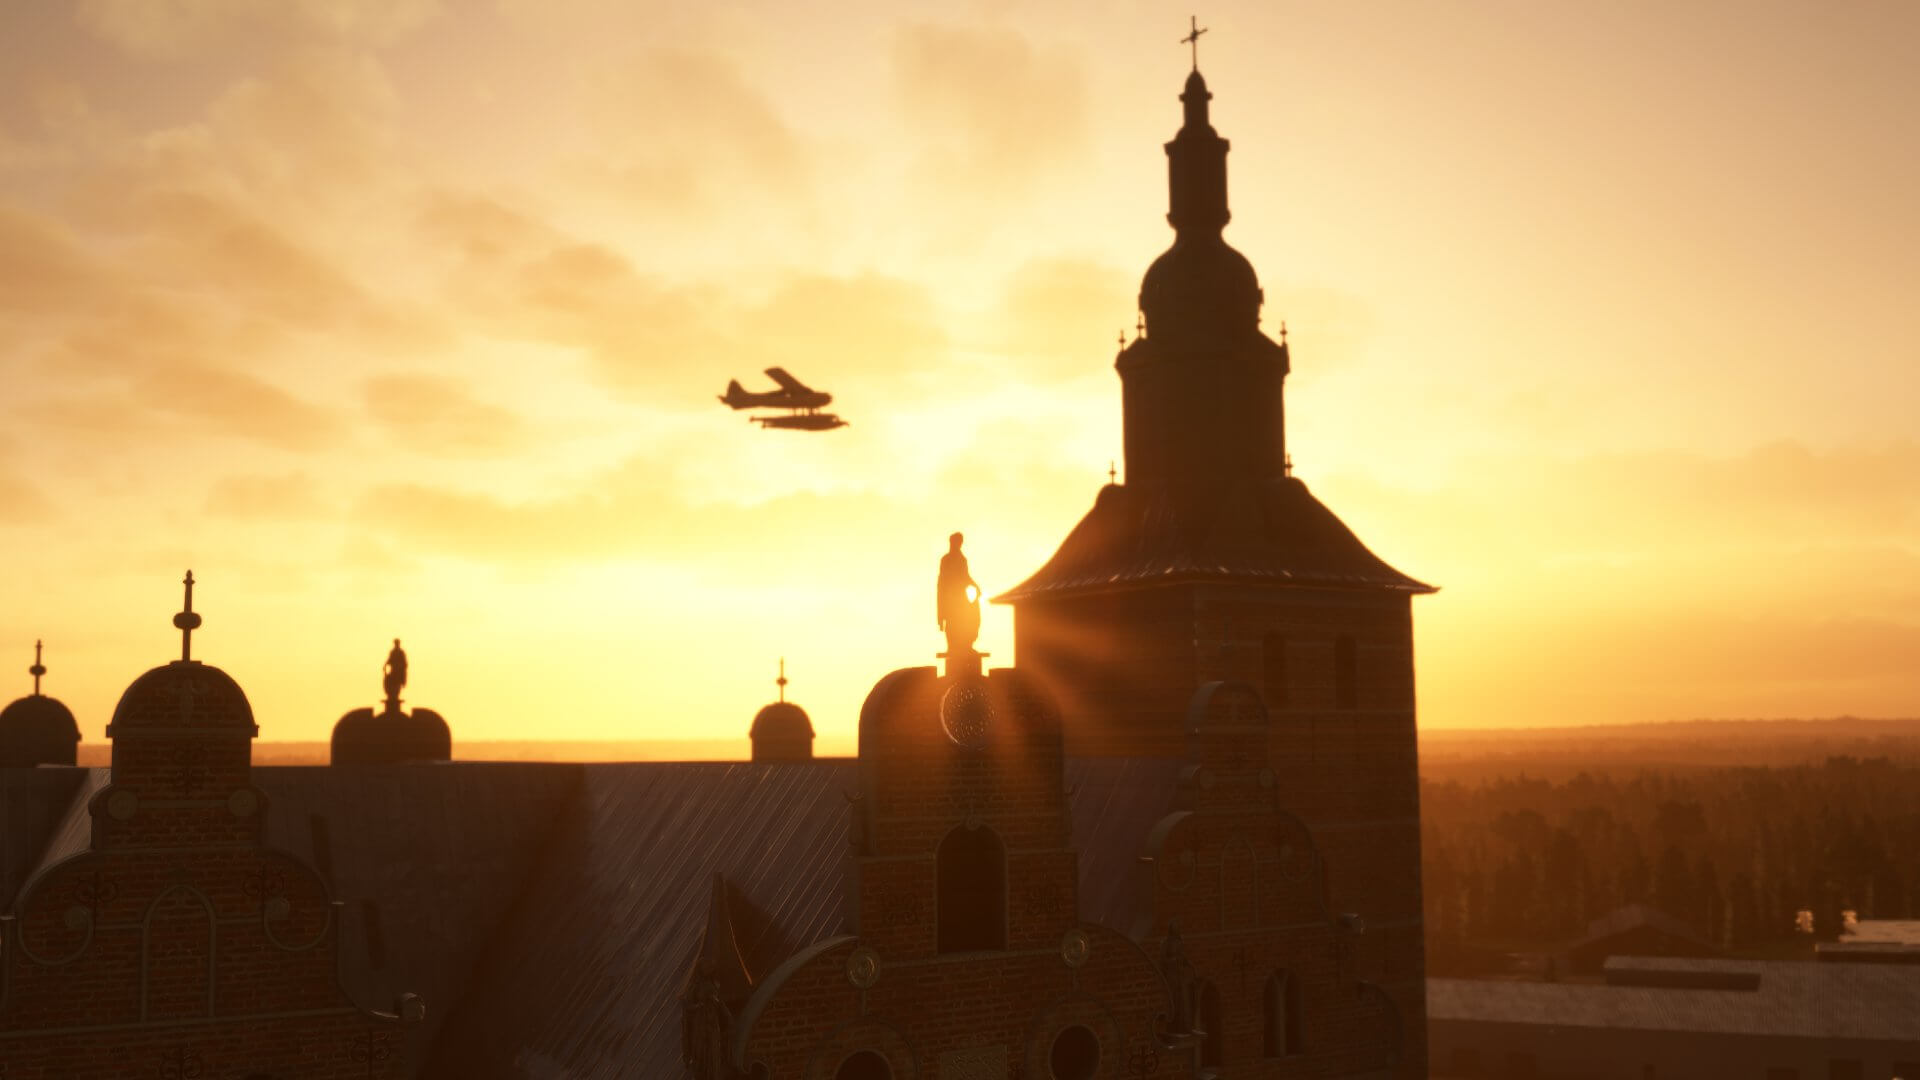 A silhouette of a propeller aircraft flies near a Church with the sun shining in the background